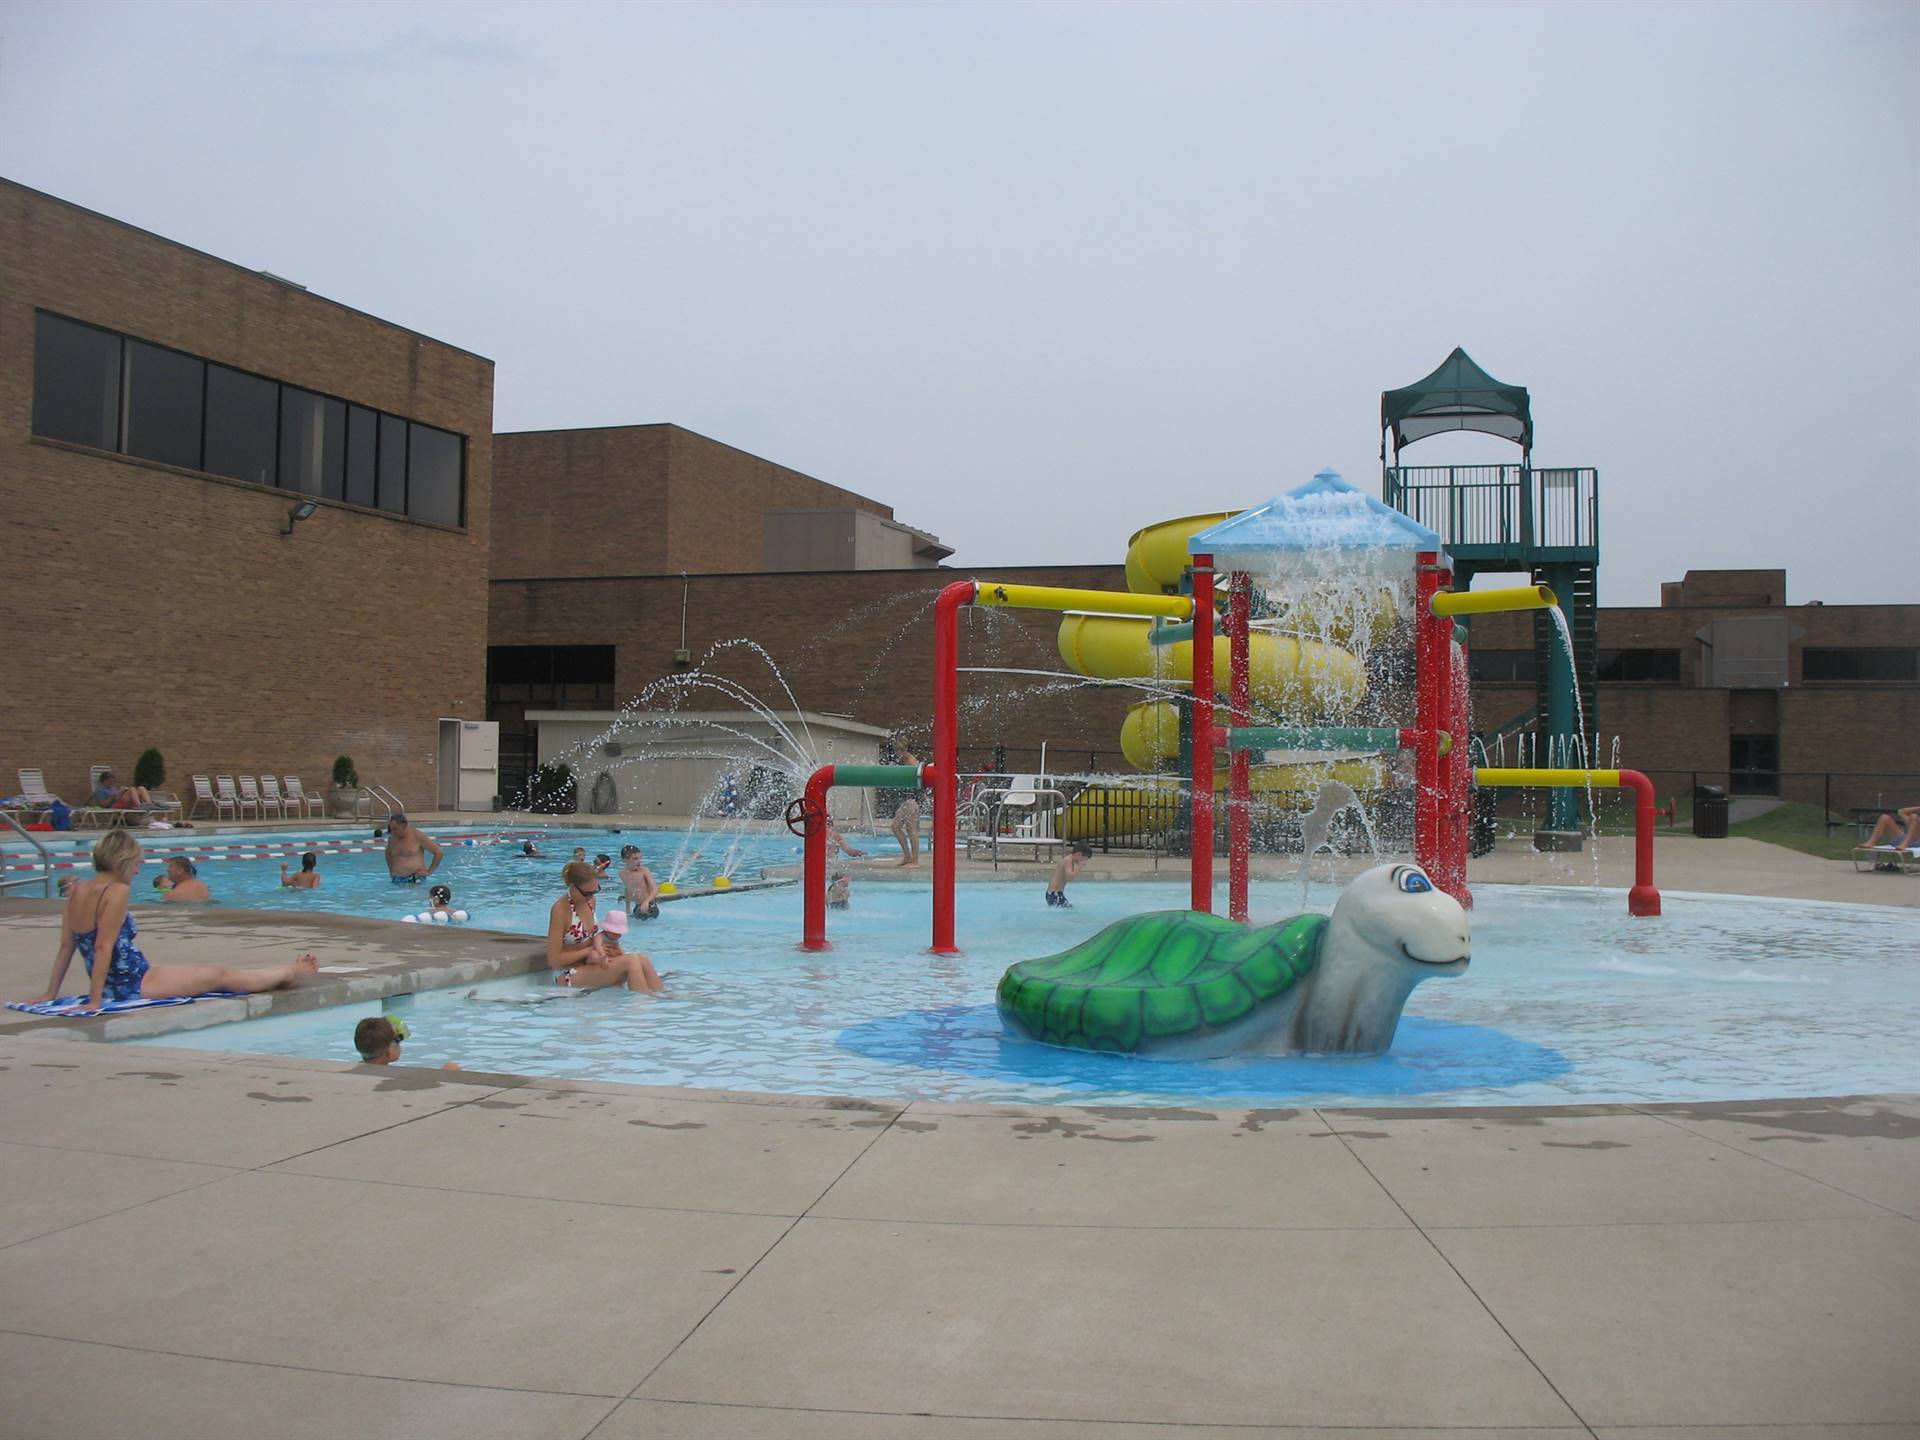 The splash area at the outdoor pool with a turtle water feature and spray features